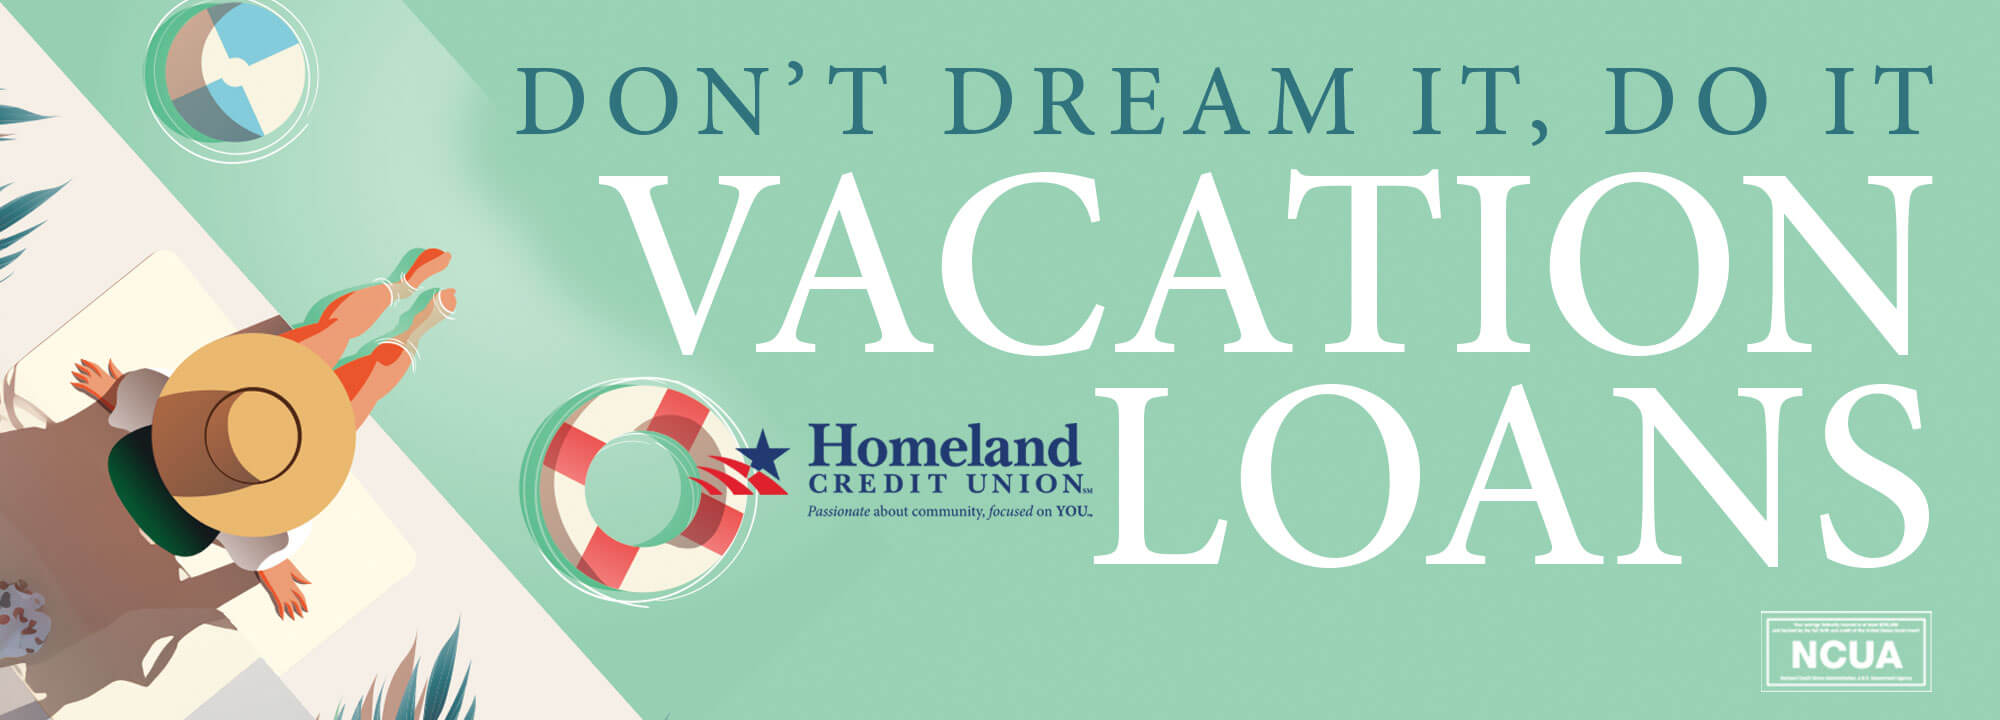 Don't dream it, do it. Vacation Loans. Homeland Credit Union. Passionate About Community Focused on You.